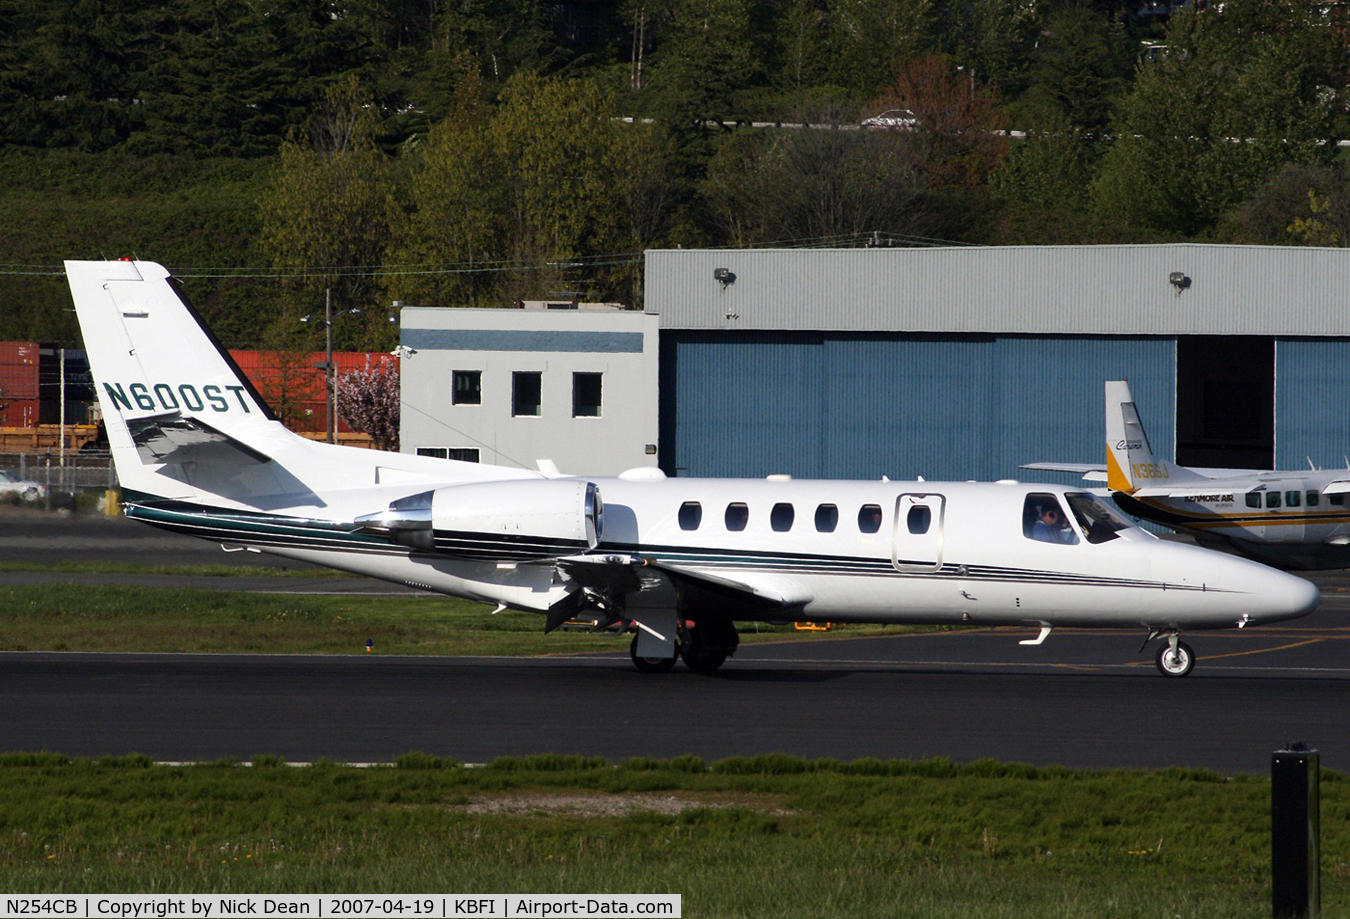 N254CB, 2002 Cessna 550 Citation Bravo C/N 550-1054, KBFI (Seen here as N600ST this reg is currently on a Challenger so this frame is posted here using the prior ID N254CB for C/N accuracy)